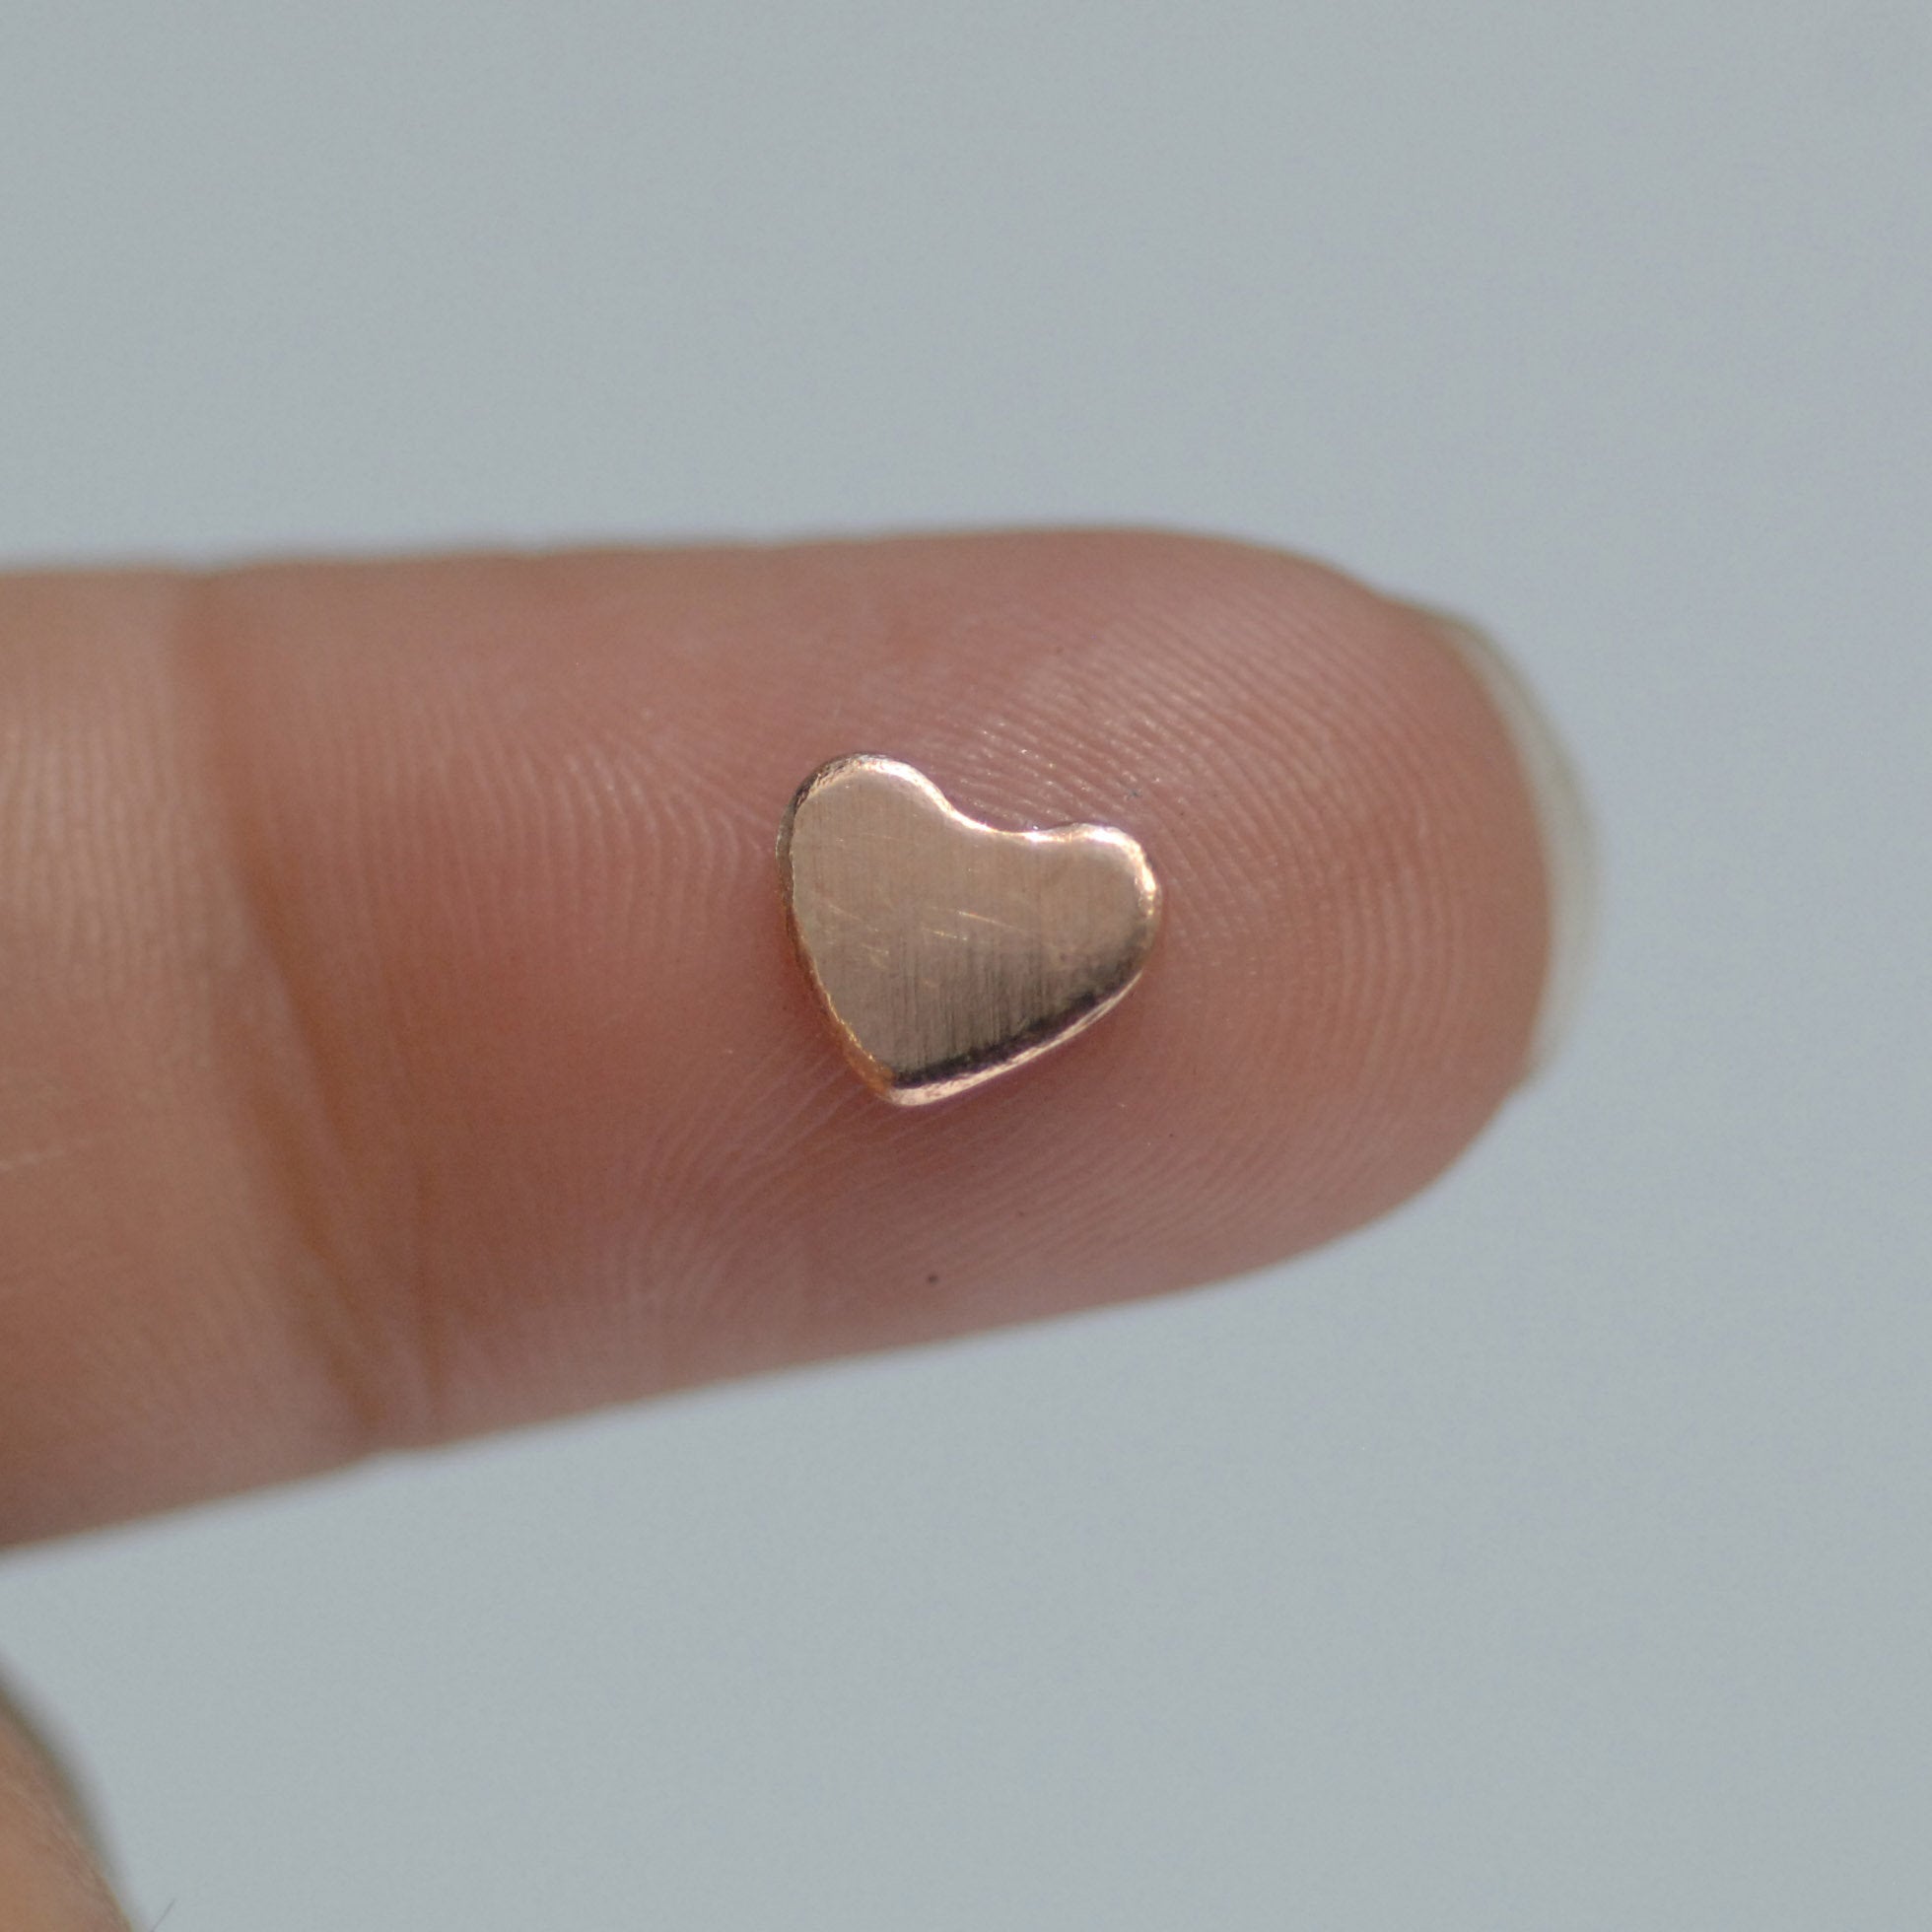 Tiny heart shapes copper, brass, bronze, nickel silver for making jewelry 24g 22g 20g